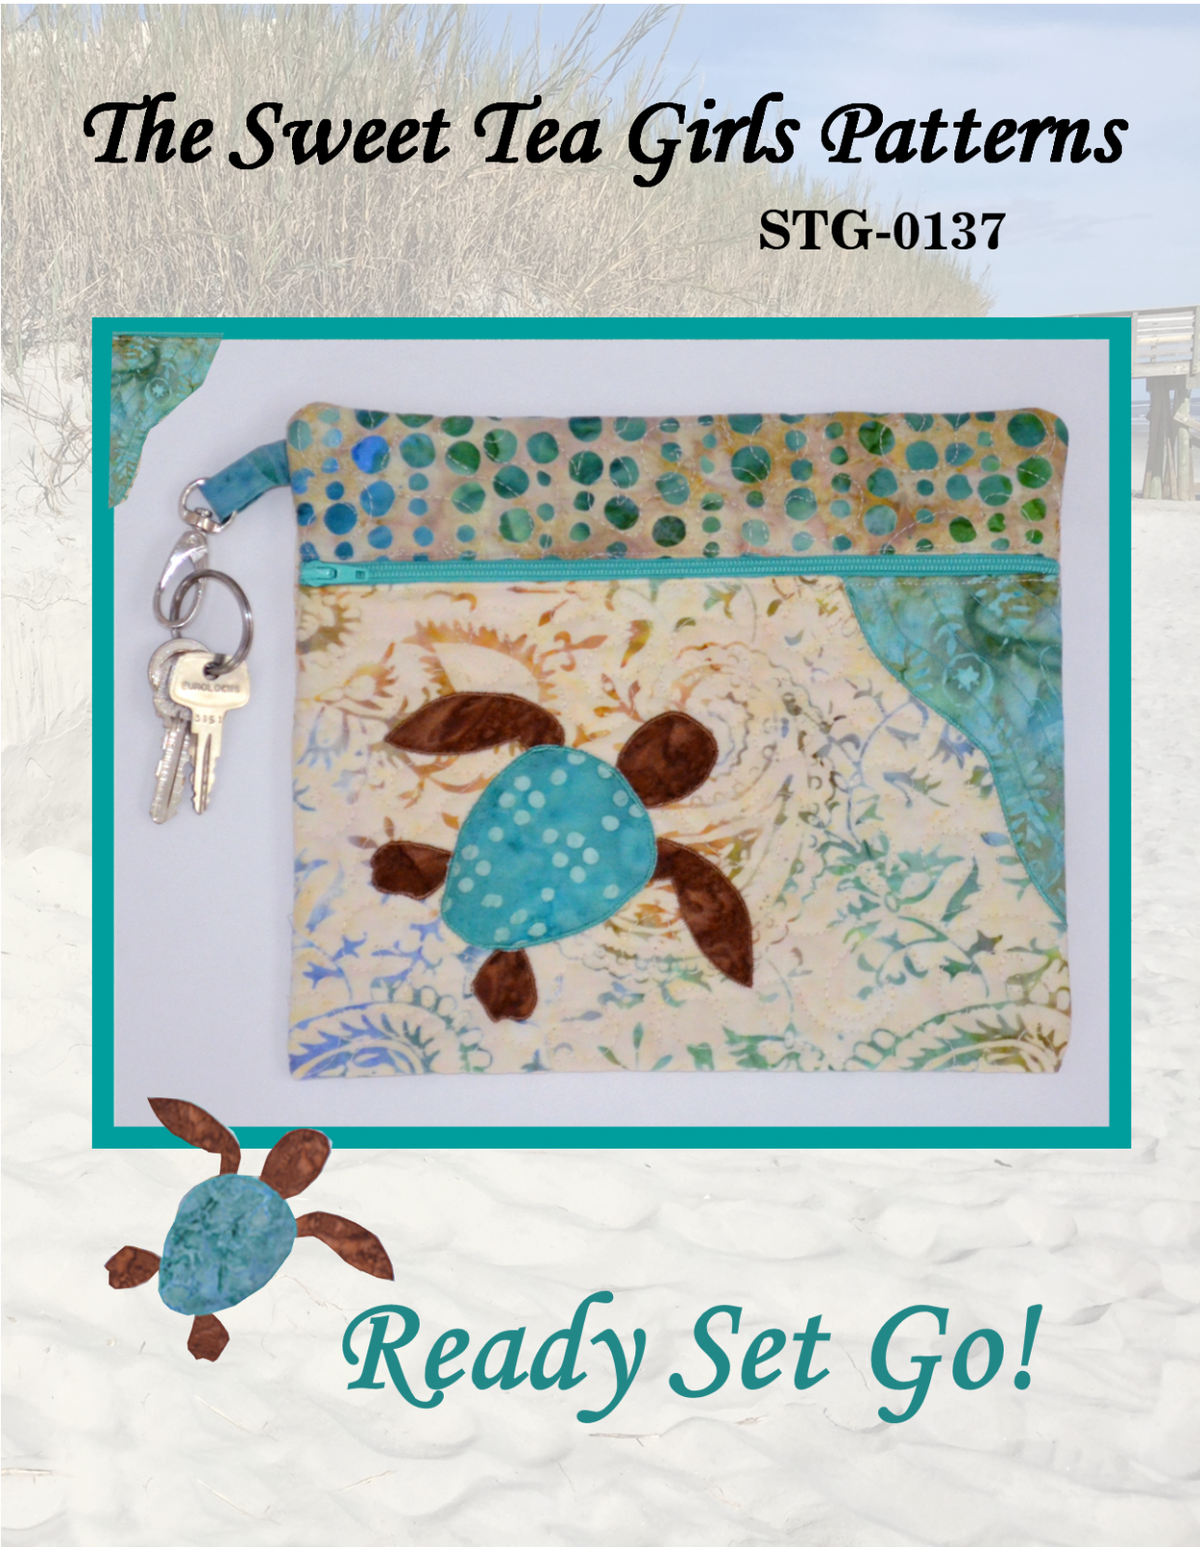 Ready Set Go! Quilt Pattern from The Sweet Tea Girls - STG-0137